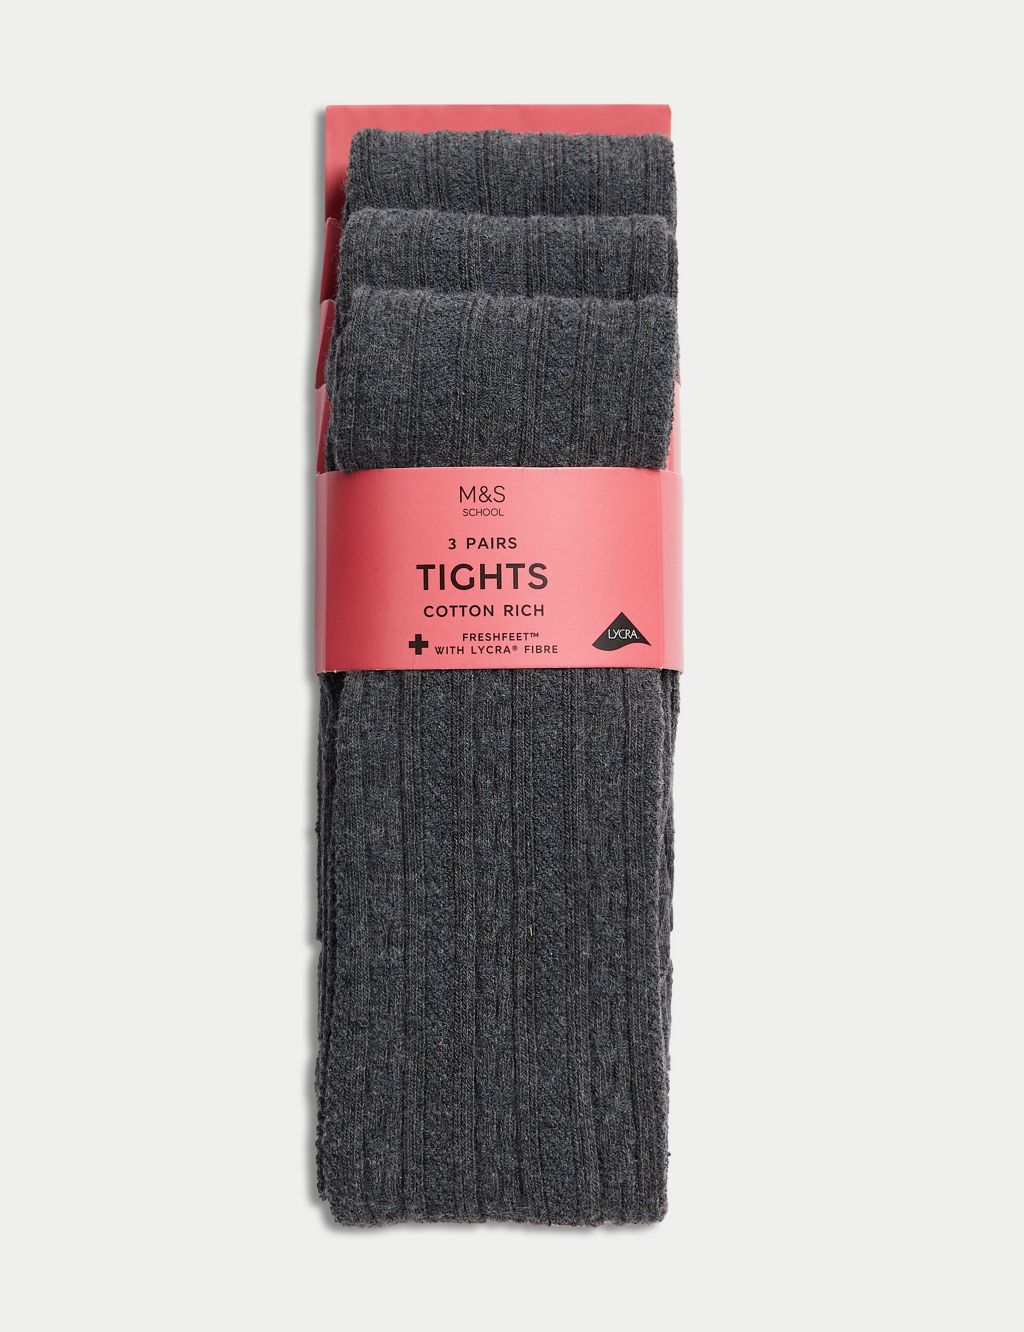 https://asset1.cxnmarksandspencer.com/is/image/mands/3pk-of-Cable-Knit-Tights--2-16-Yrs-/SD_04_T64_5710P_T0_X_EC_0?$PDP_IMAGEGRID$&wid=1024&qlt=80